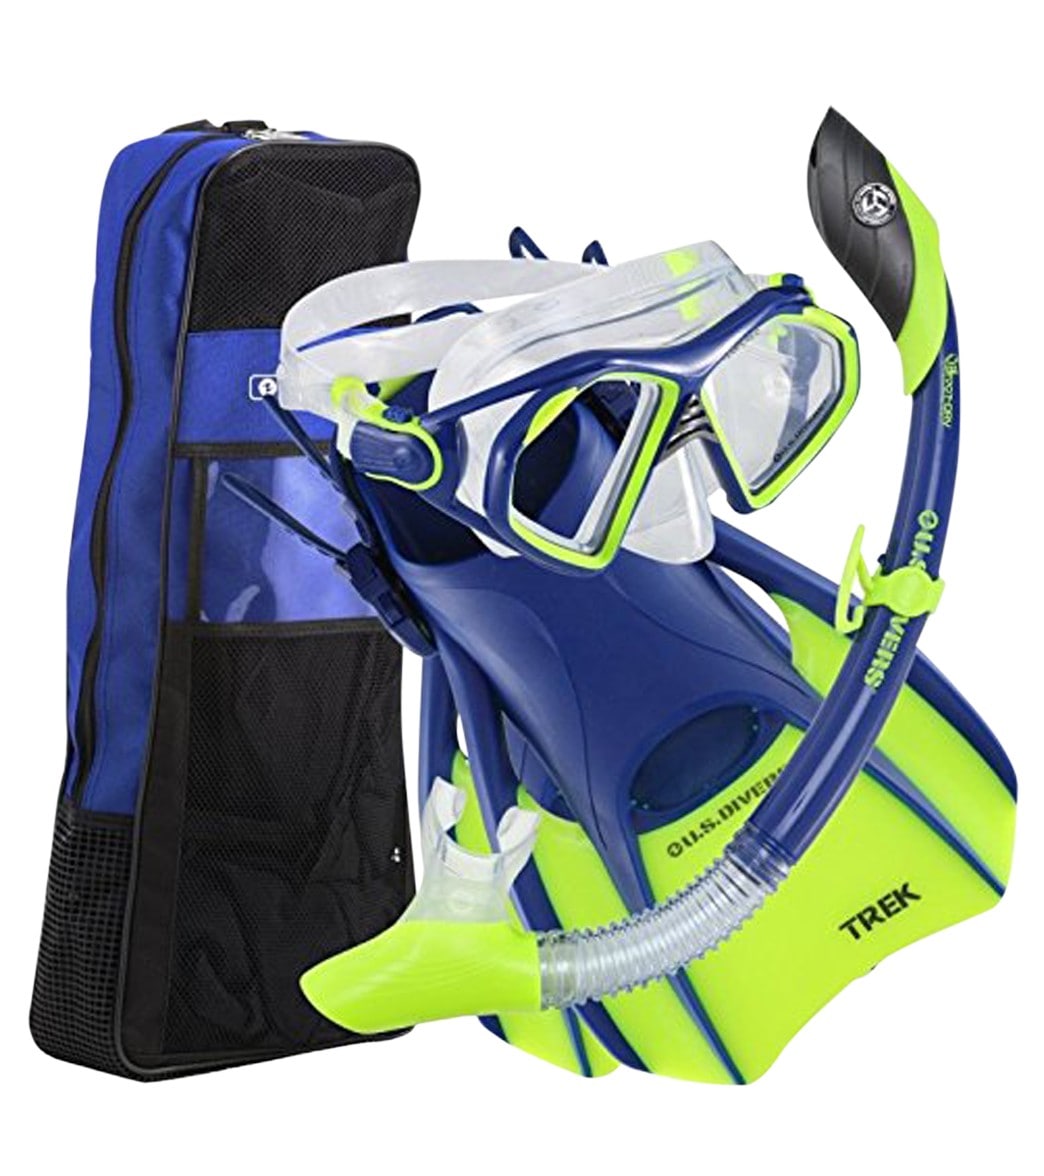 U.S. Divers admiral lx/island dry/trek/travel bag mask snorkel and fin set - blue/bright yellow large10-13 - swimoutlet.com